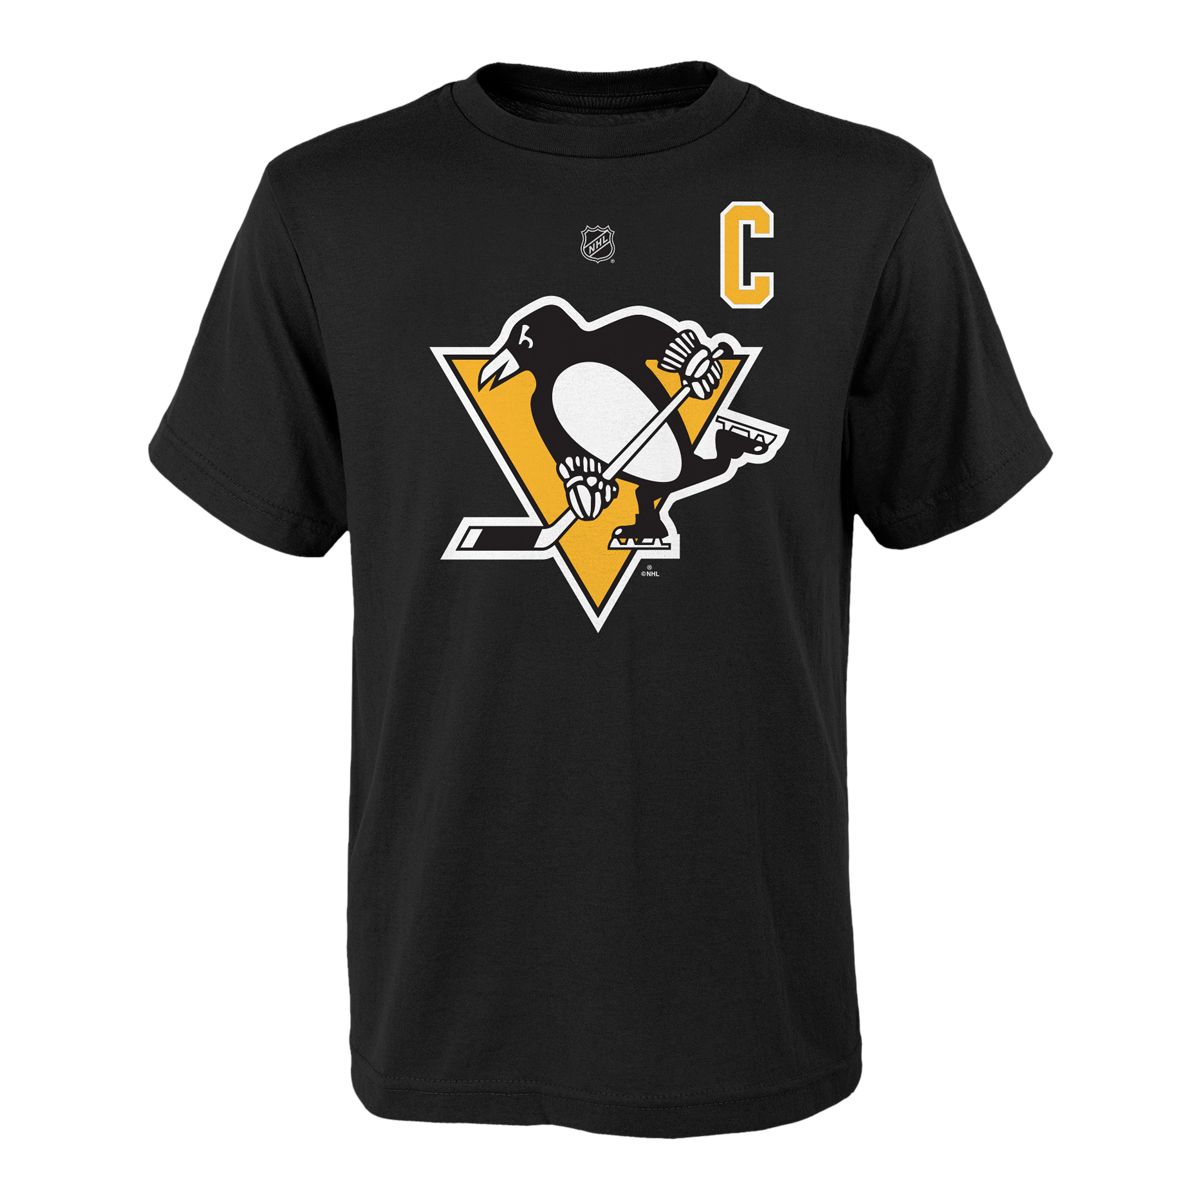 Outerstuff Youth Sidney Crosby Black Pittsburgh Penguins 2021/22 Alternate Replica Player Jersey Size: Small/Medium